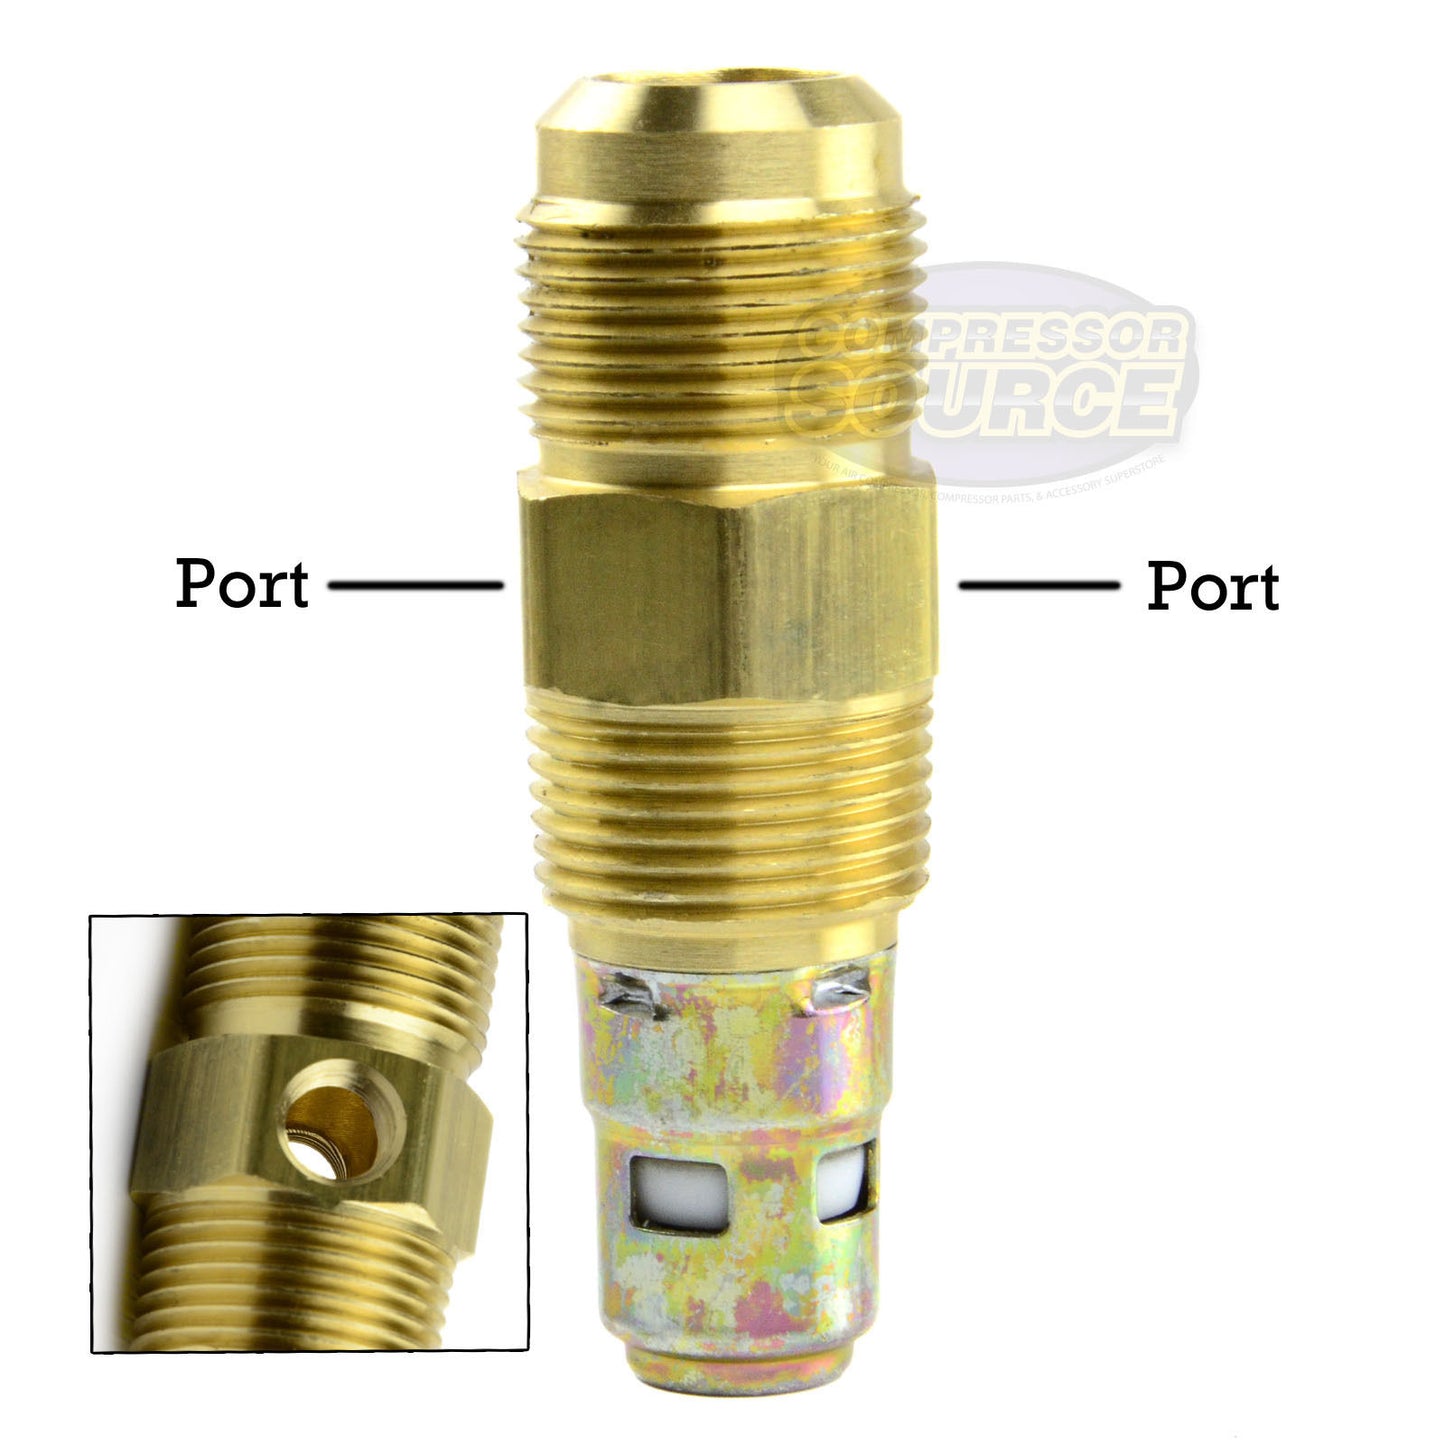 In Tank Brass Check Valve 3/4" Male NPT x 3/4" Flare with Extra Side Port